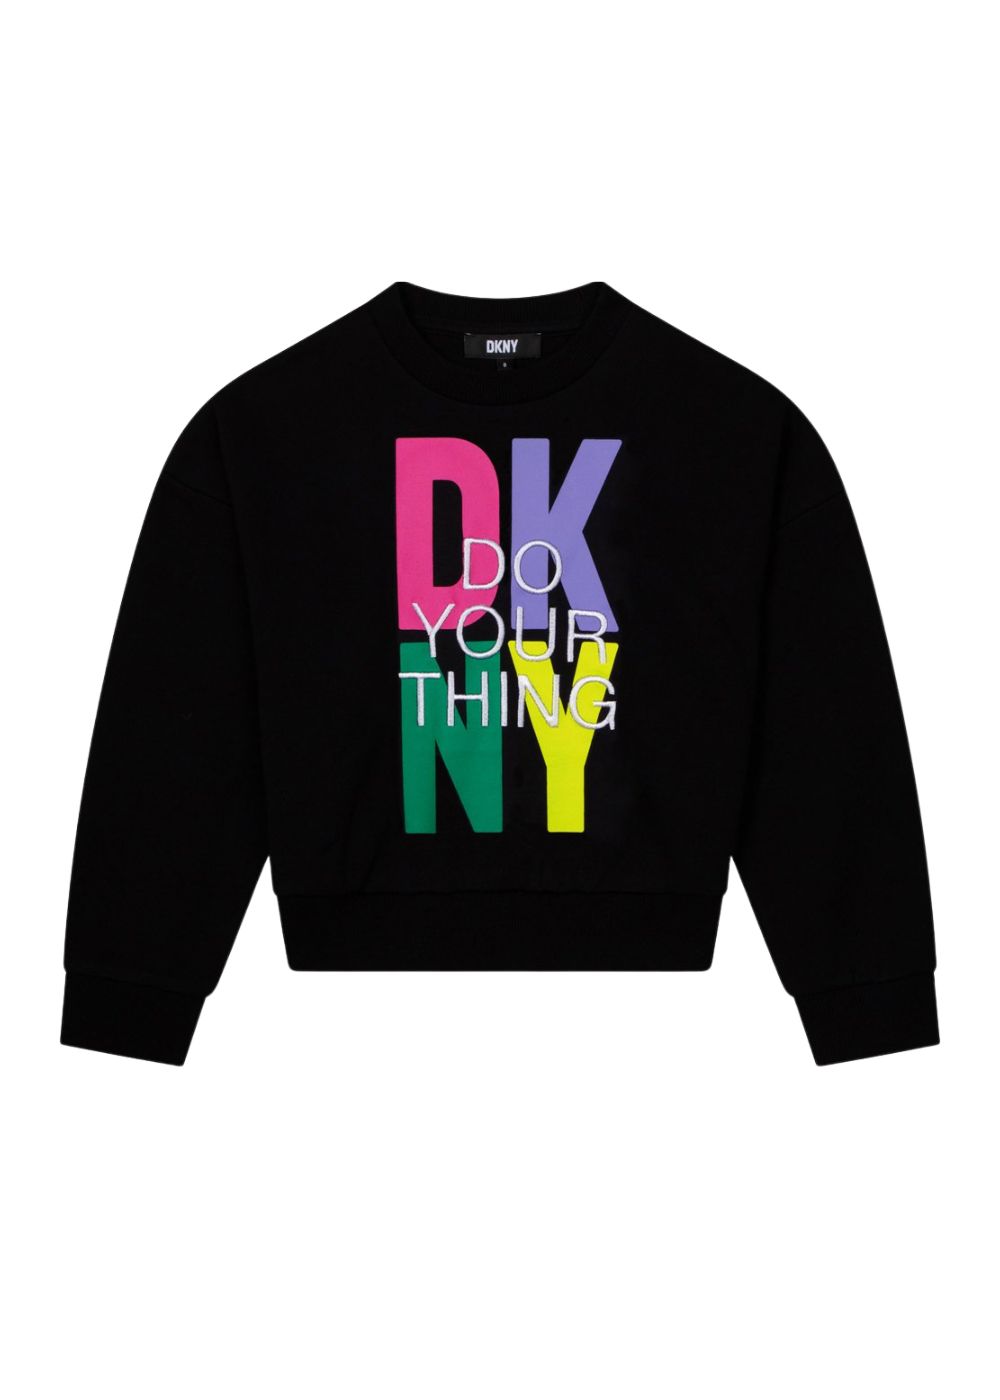 Featured image for “Dkny Felpa Con Stampa Logo”